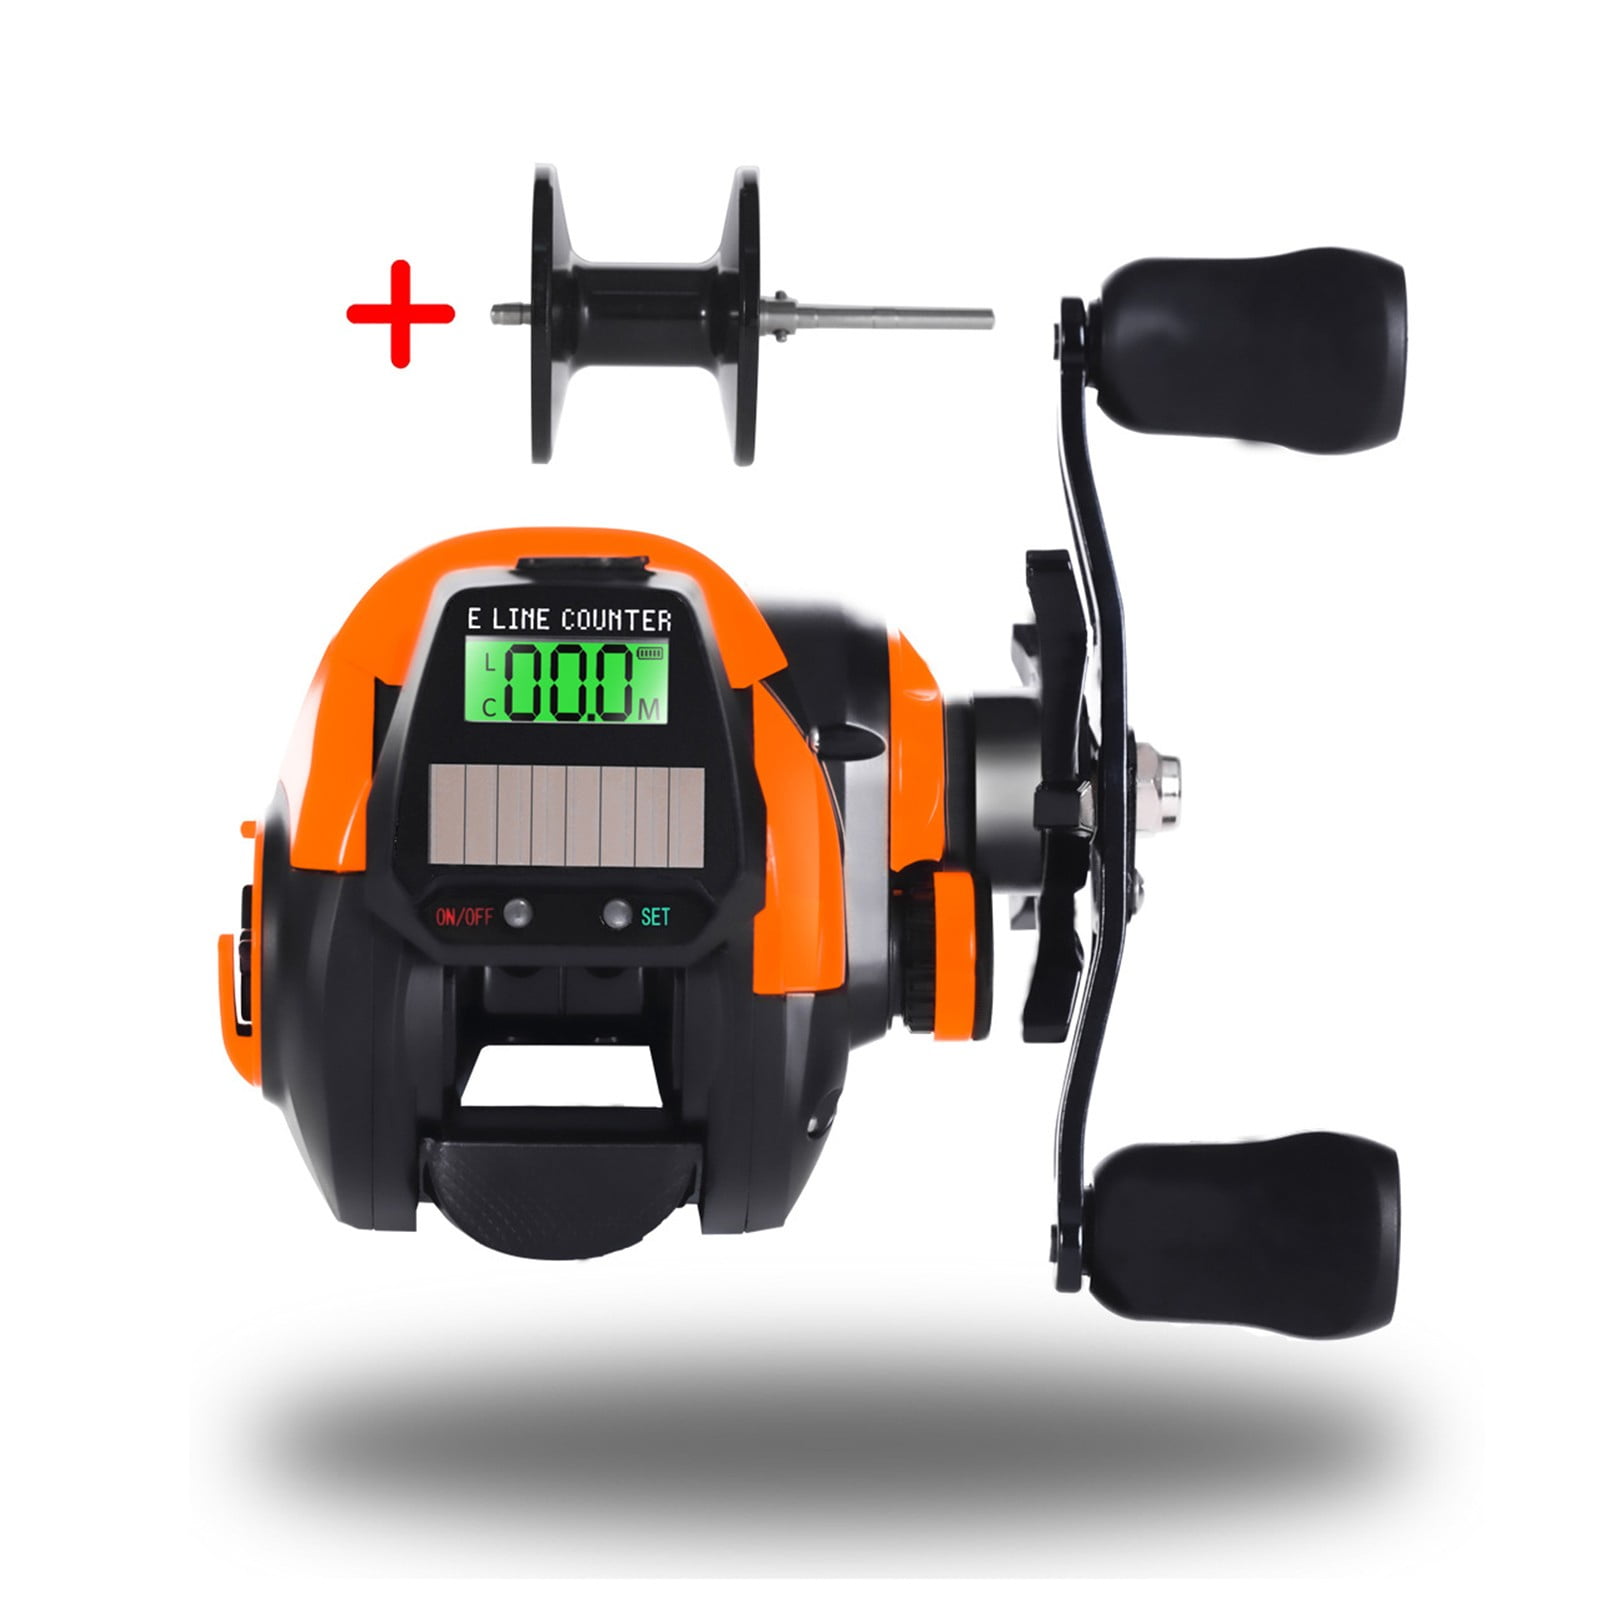 80:1 6 1BB Fishing Reel Left / Right Hand 10KG Power Low Profile Line Counter  Fishing Tackle Gear With Digital Display Iixkt From 144,95 €